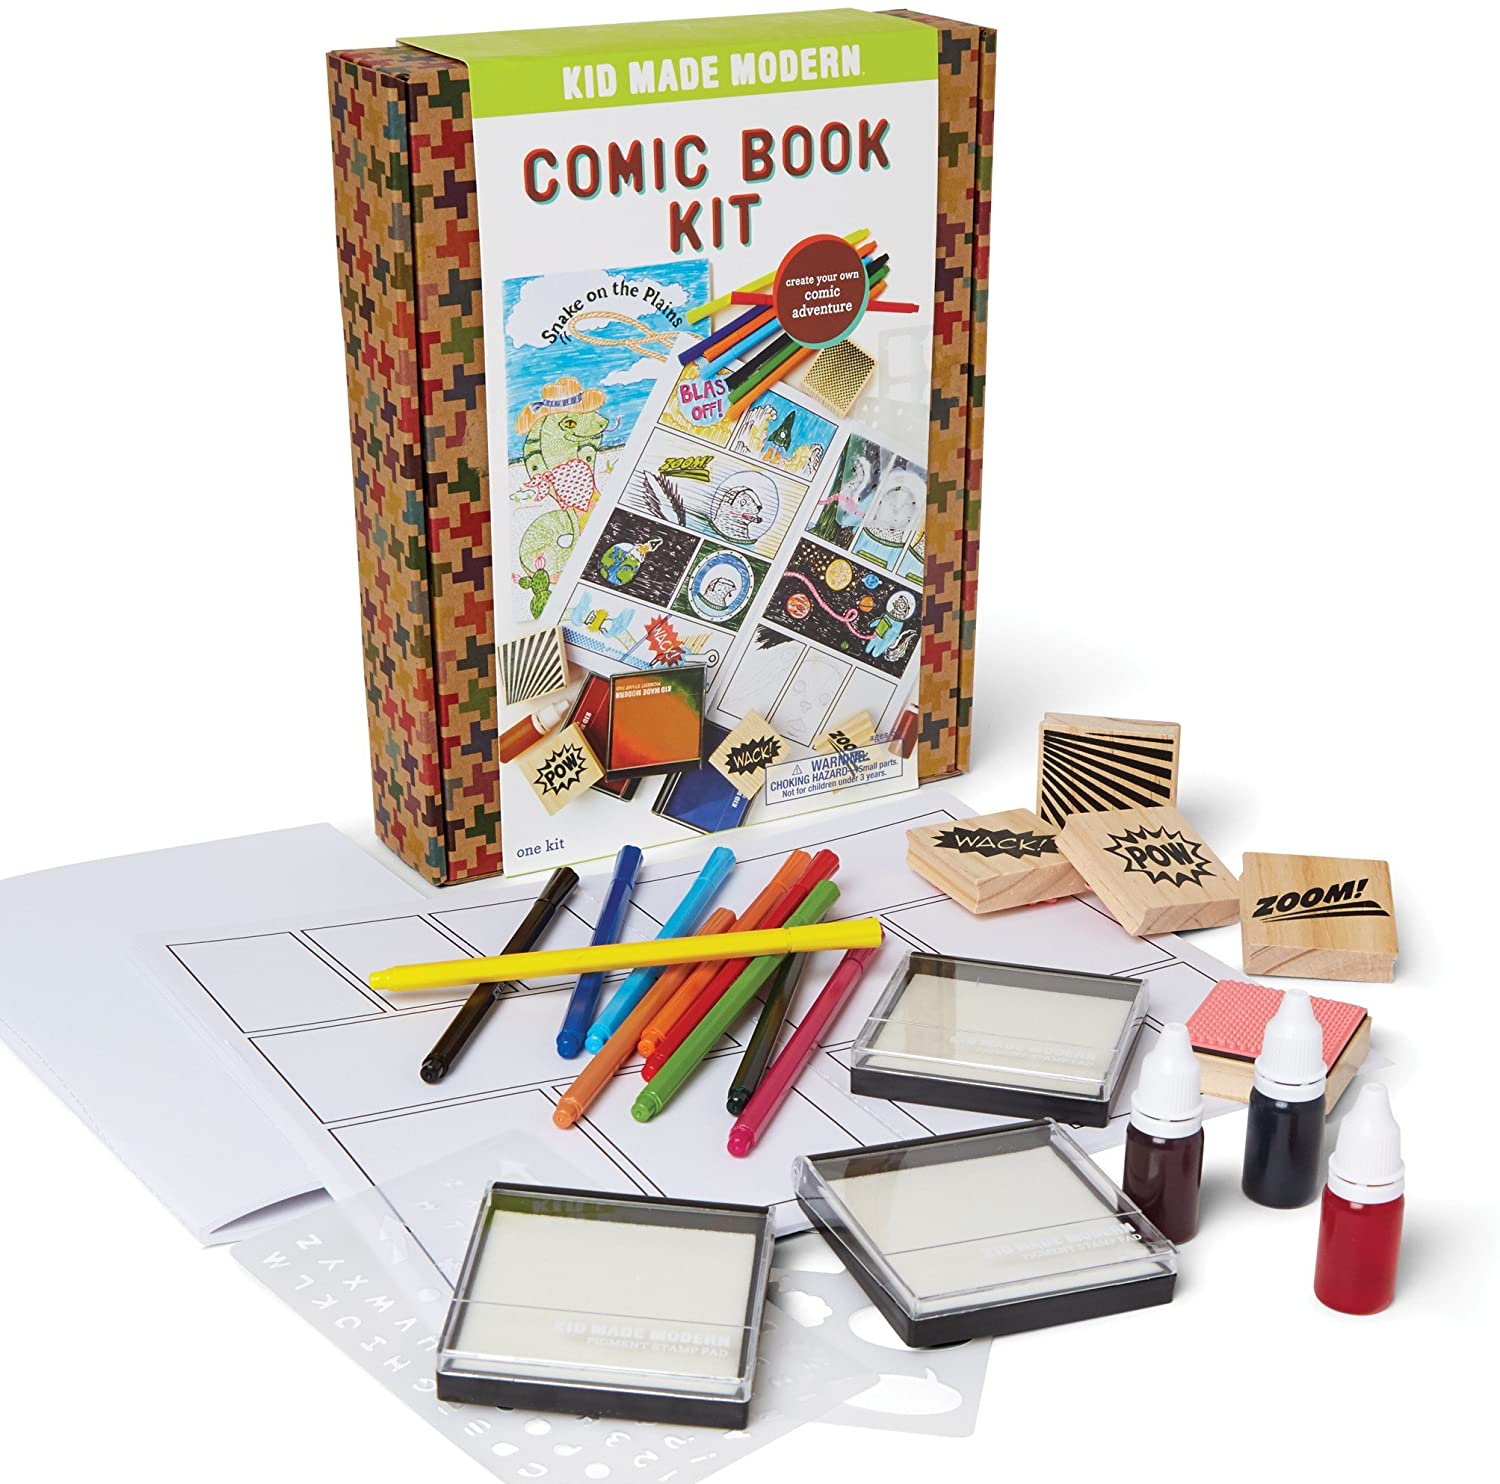 My Comic Book Kit - A2Z Science & Learning Toy Store